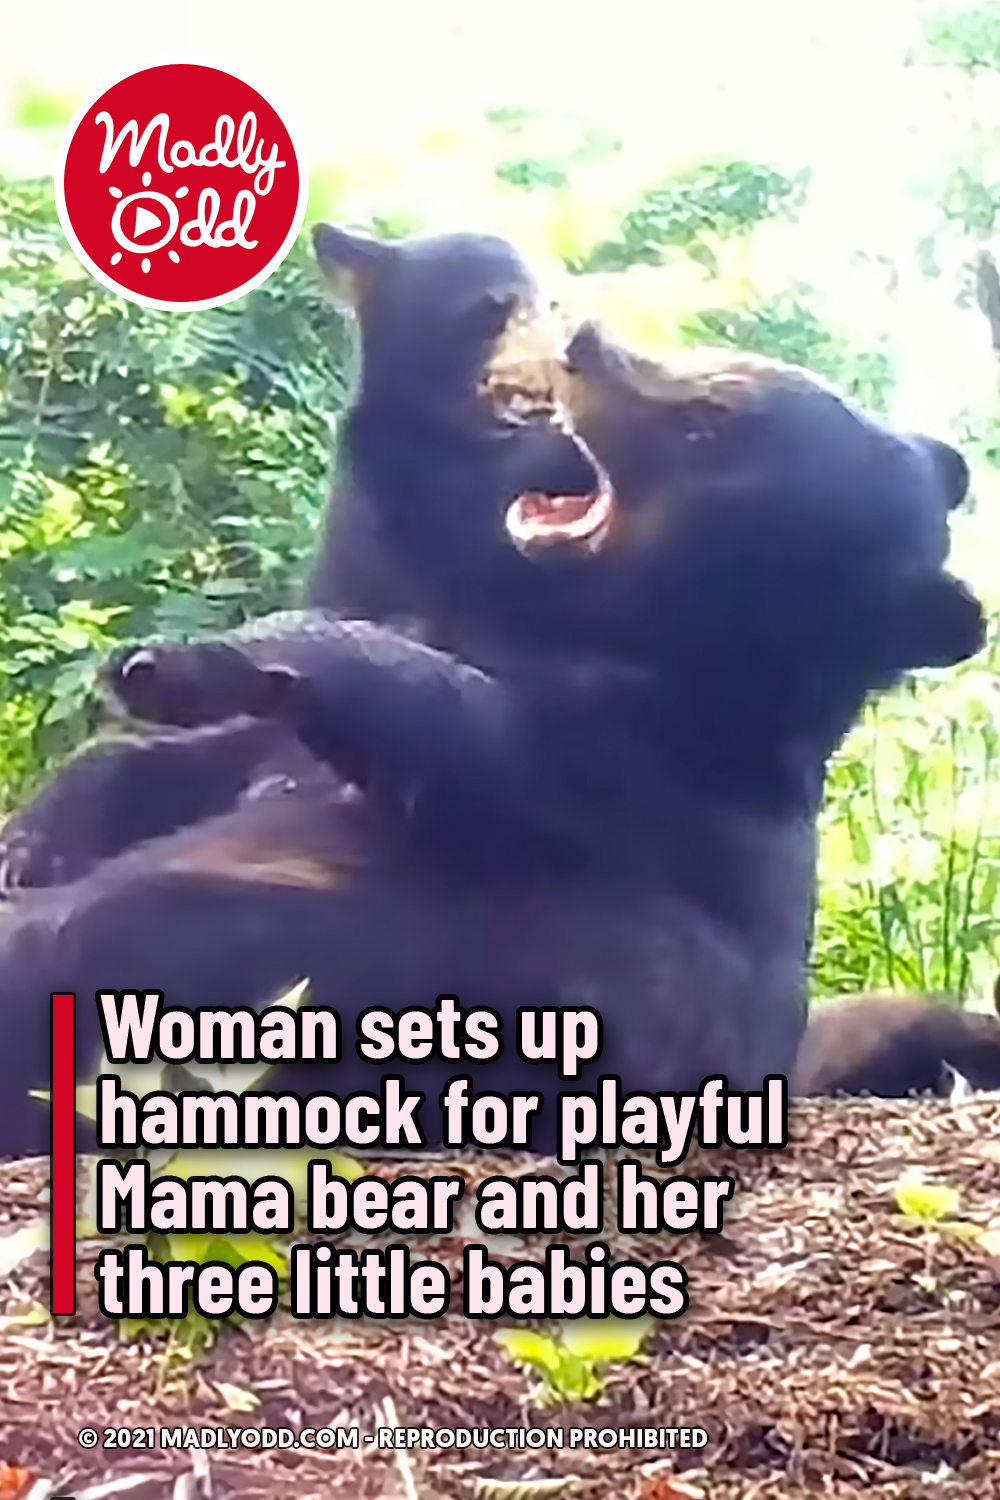 Woman sets up hammock for playful Mama bear and her three little babies